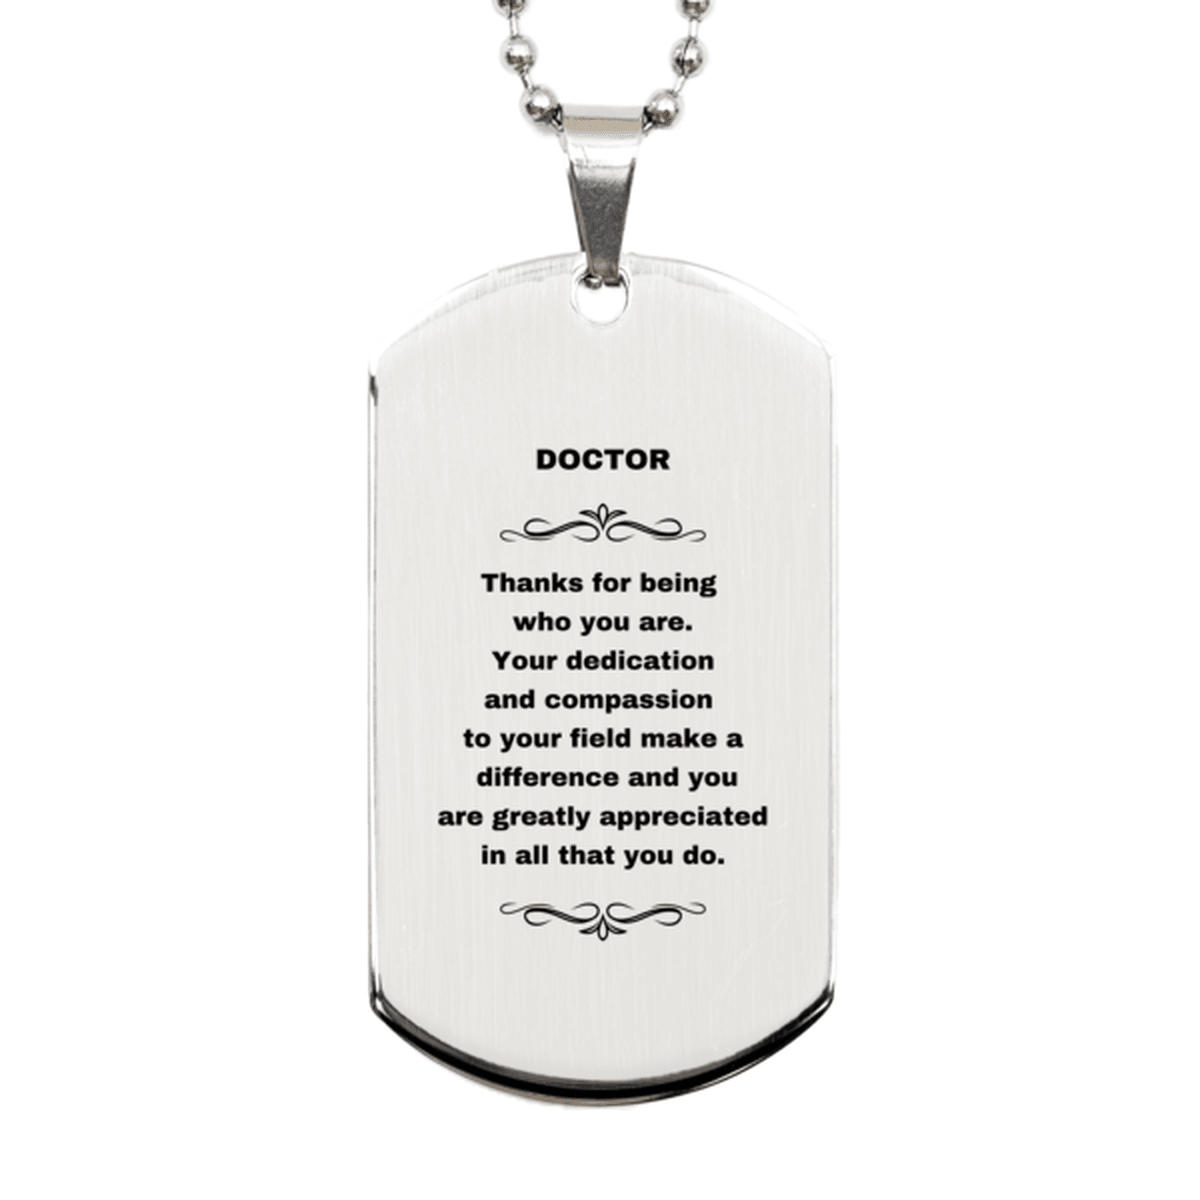 Doctor Silver Dog Tag Necklace Engraved Bracelet - Thanks for being who you are - Birthday Christmas Jewelry Gifts Coworkers Colleague Boss - Mallard Moon Gift Shop